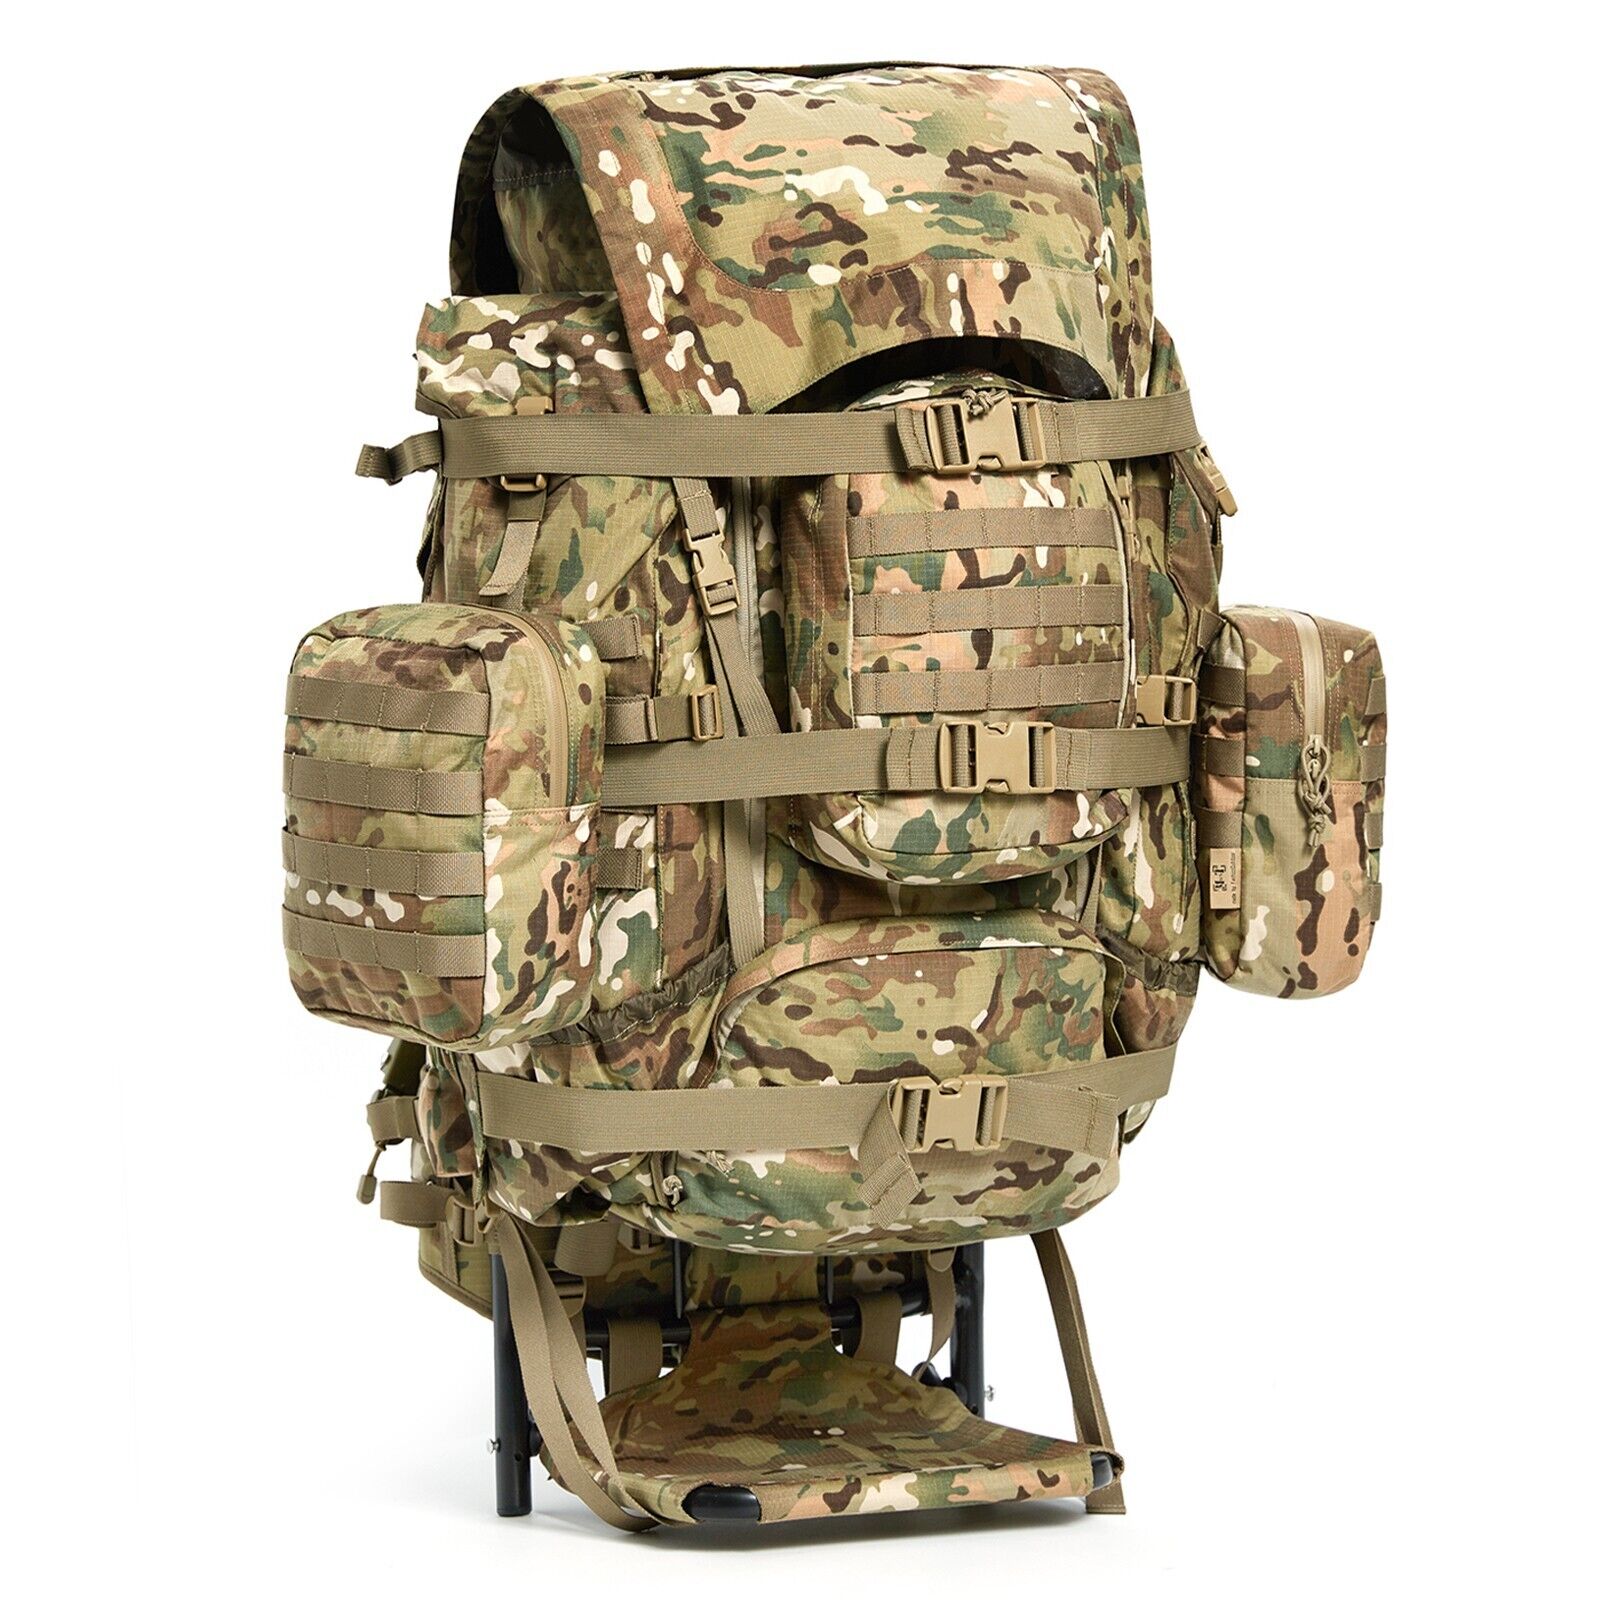 MT Military Army Rucksack, Extra Large Hunting Ruck with Aluminum External Frame